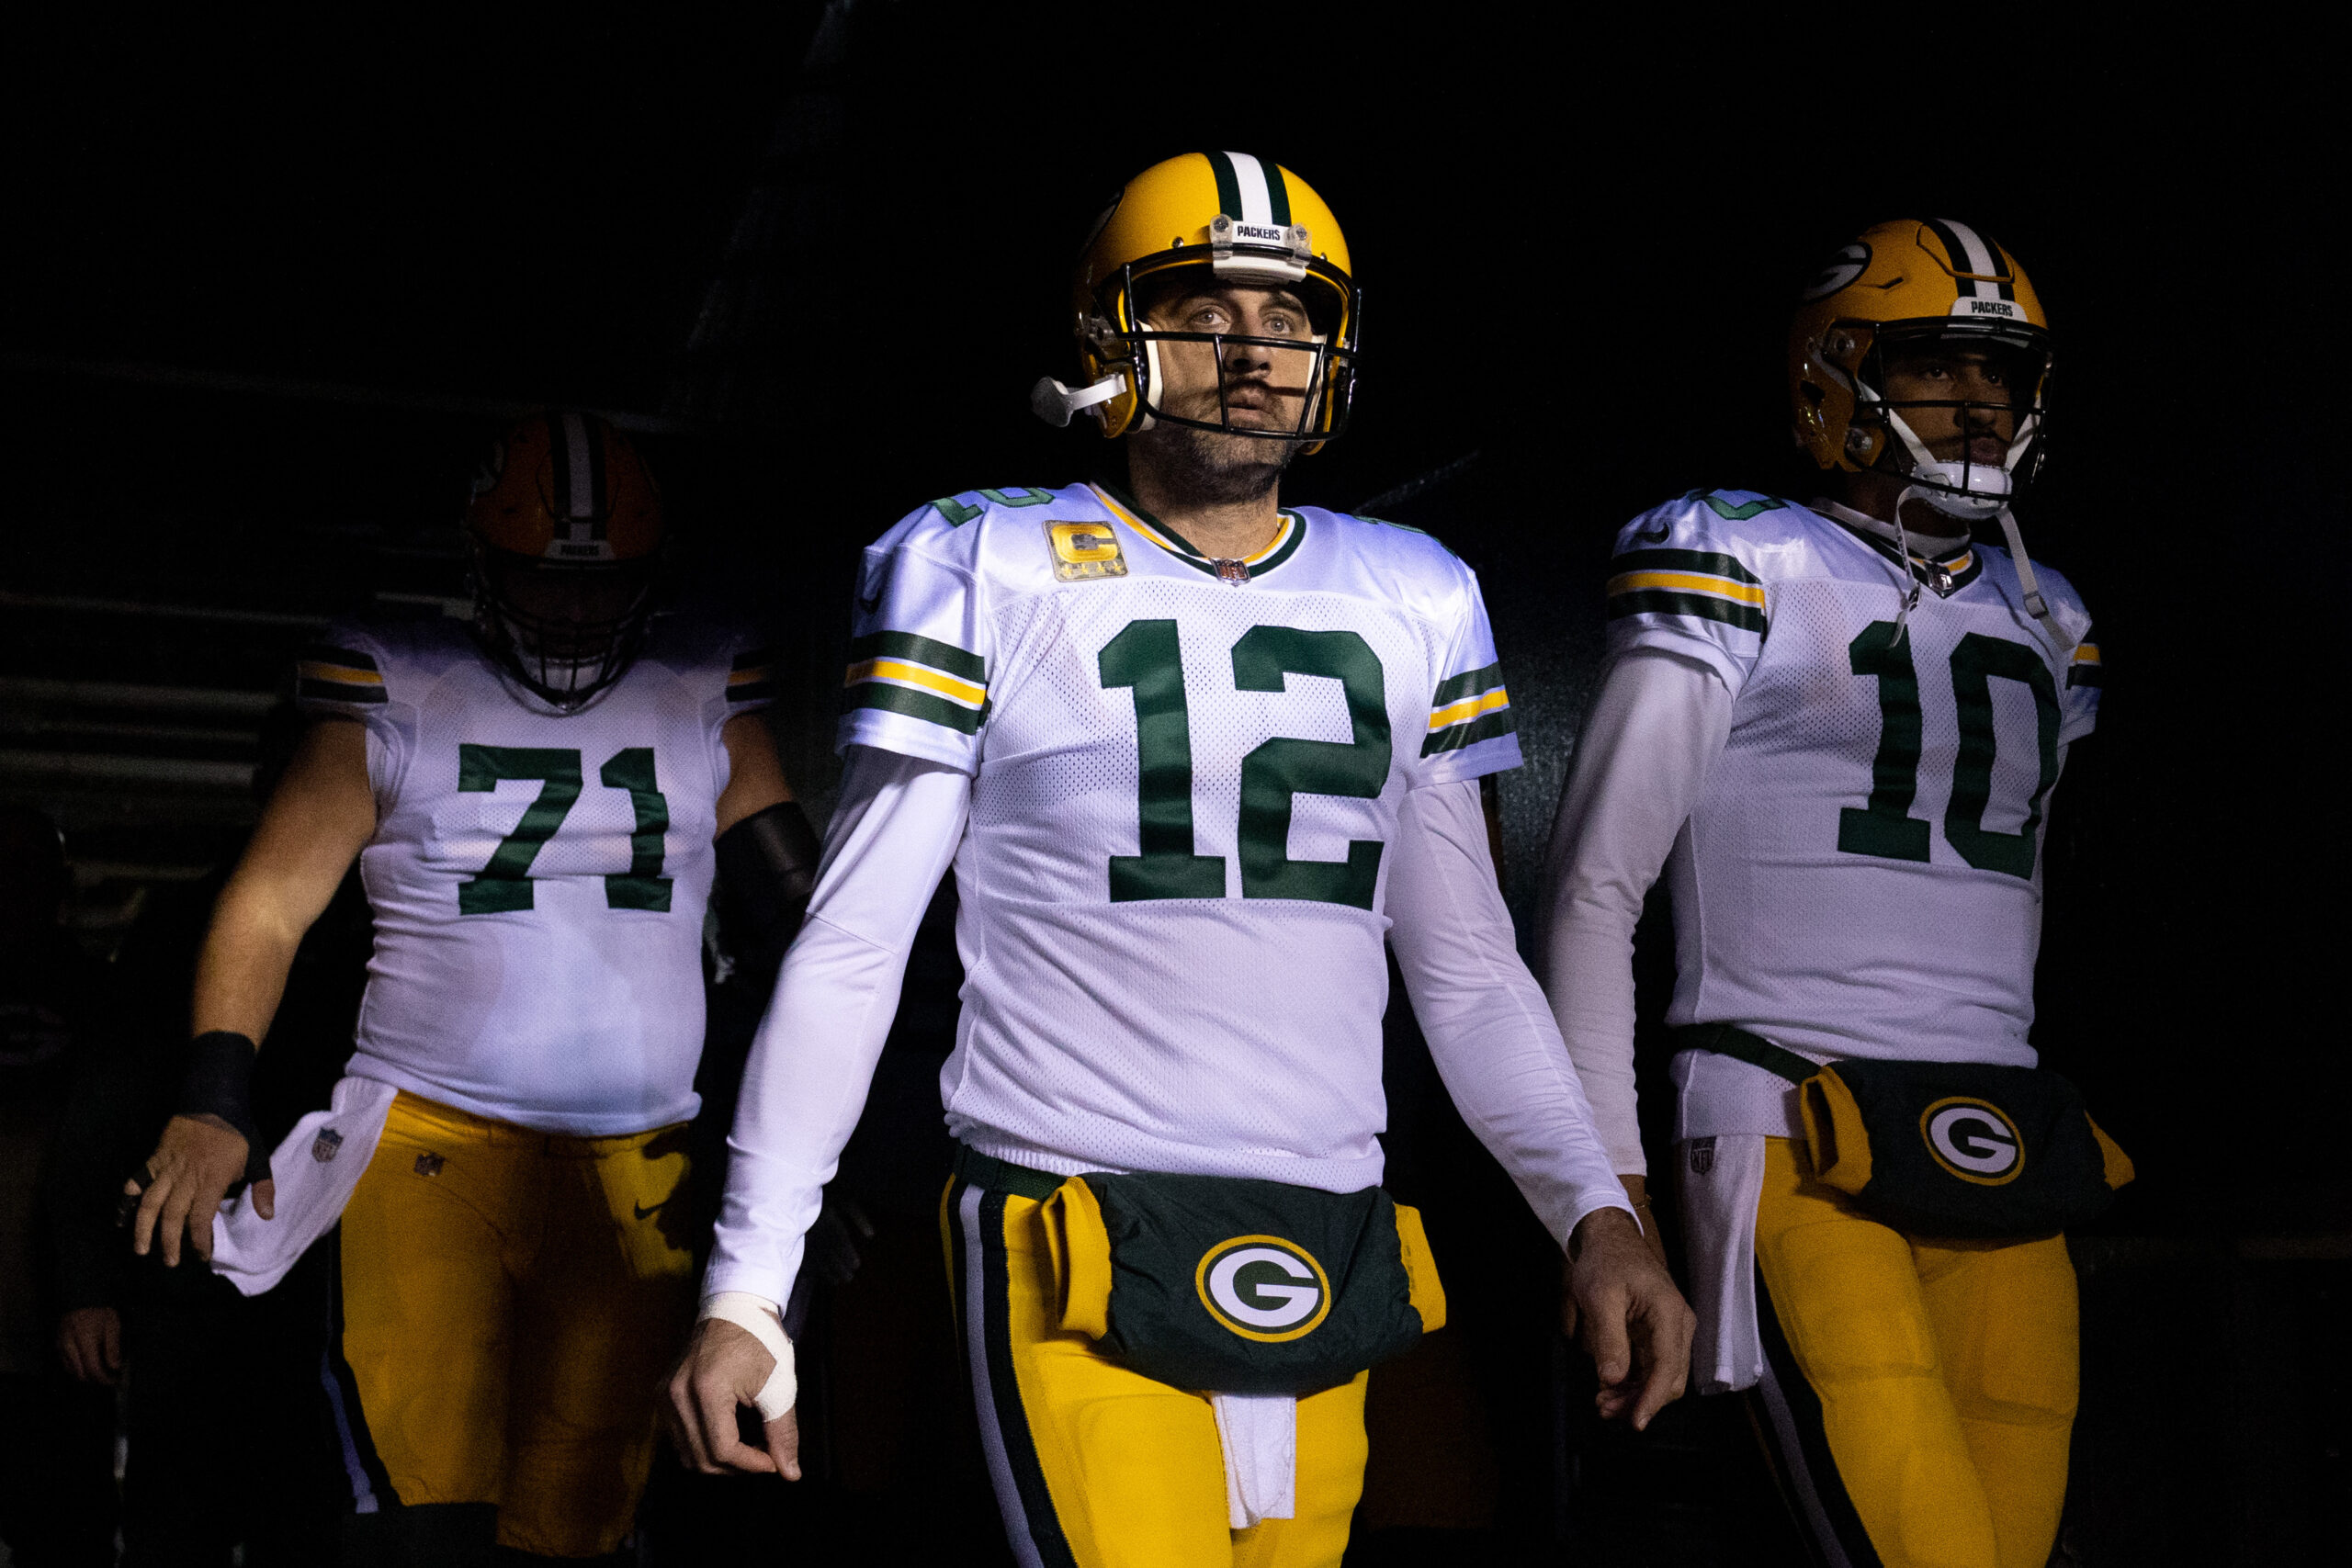 Report: Jets optimistic they will get Packers QB Aaron Rodgers